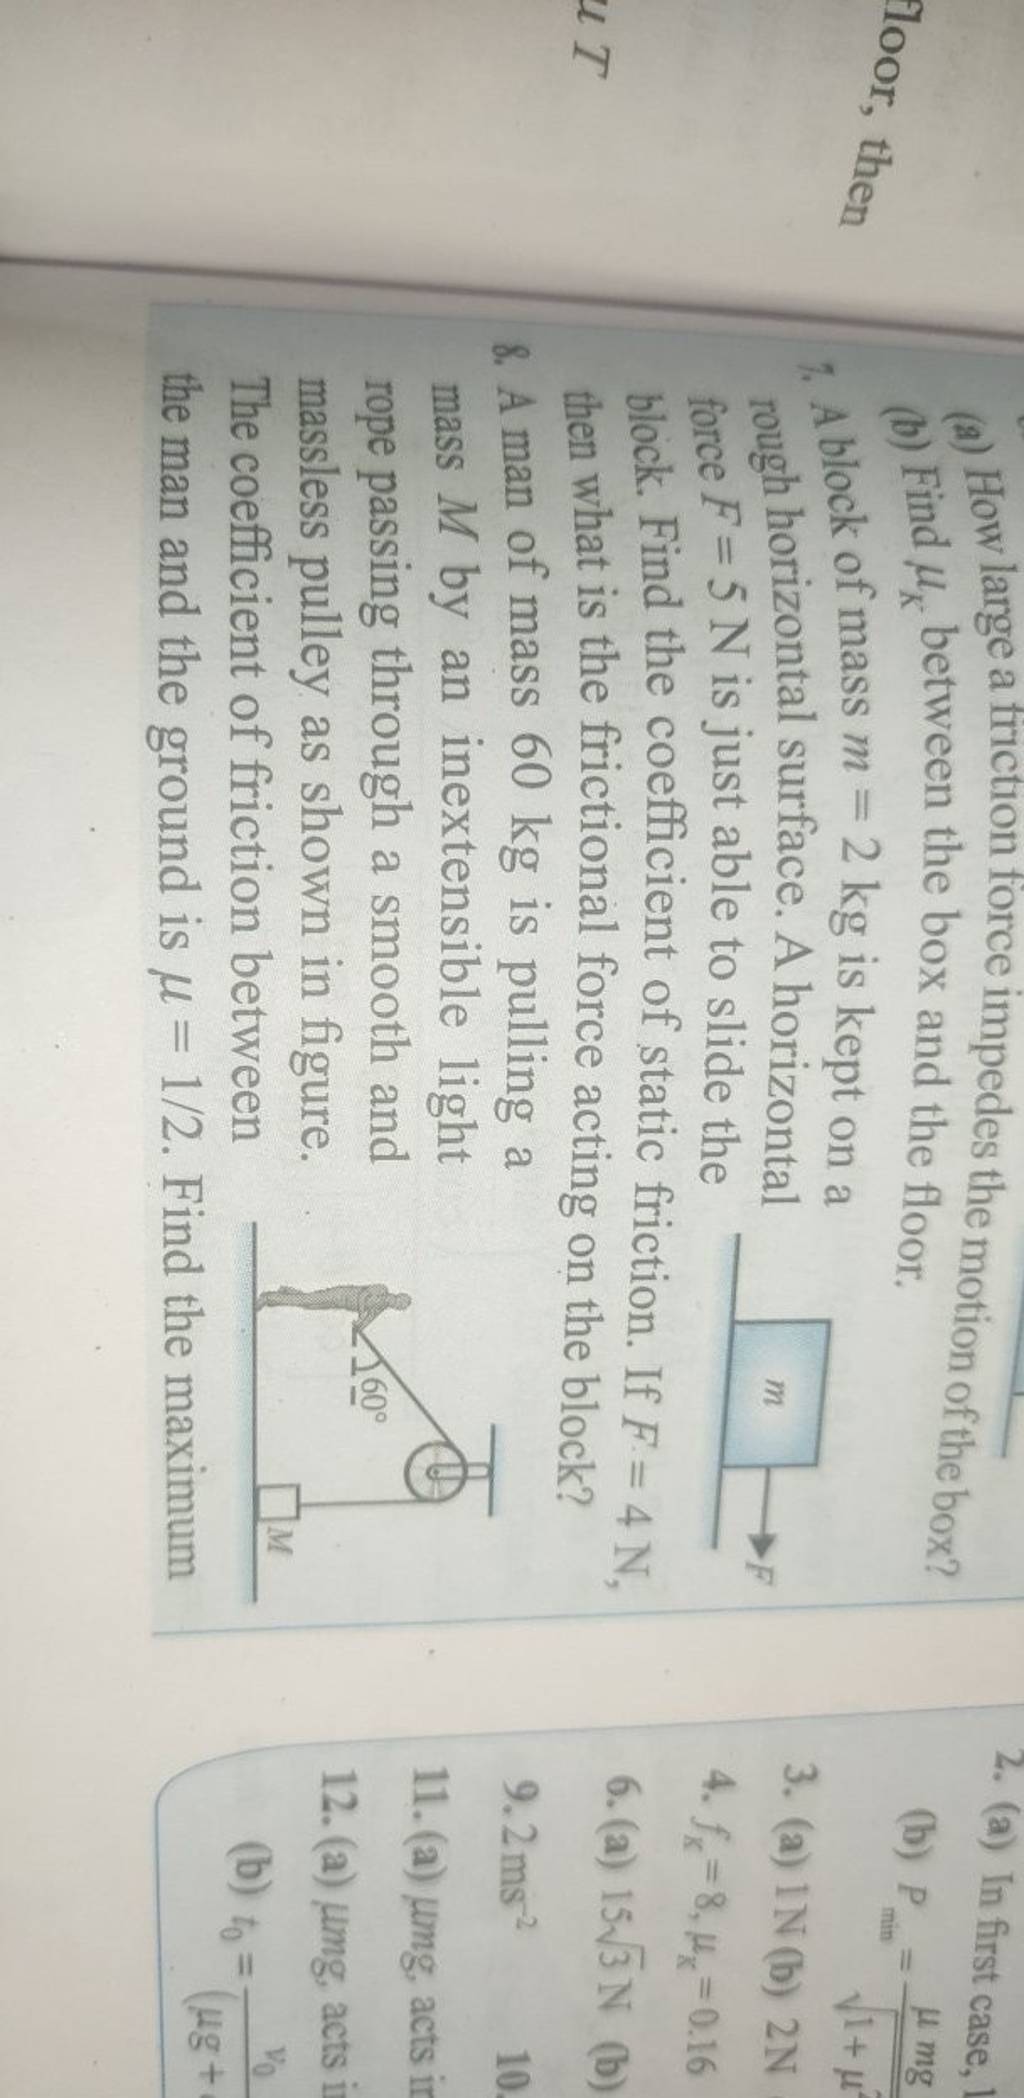 (a) How large a friction force impedes the motion of the box?
(b) Find